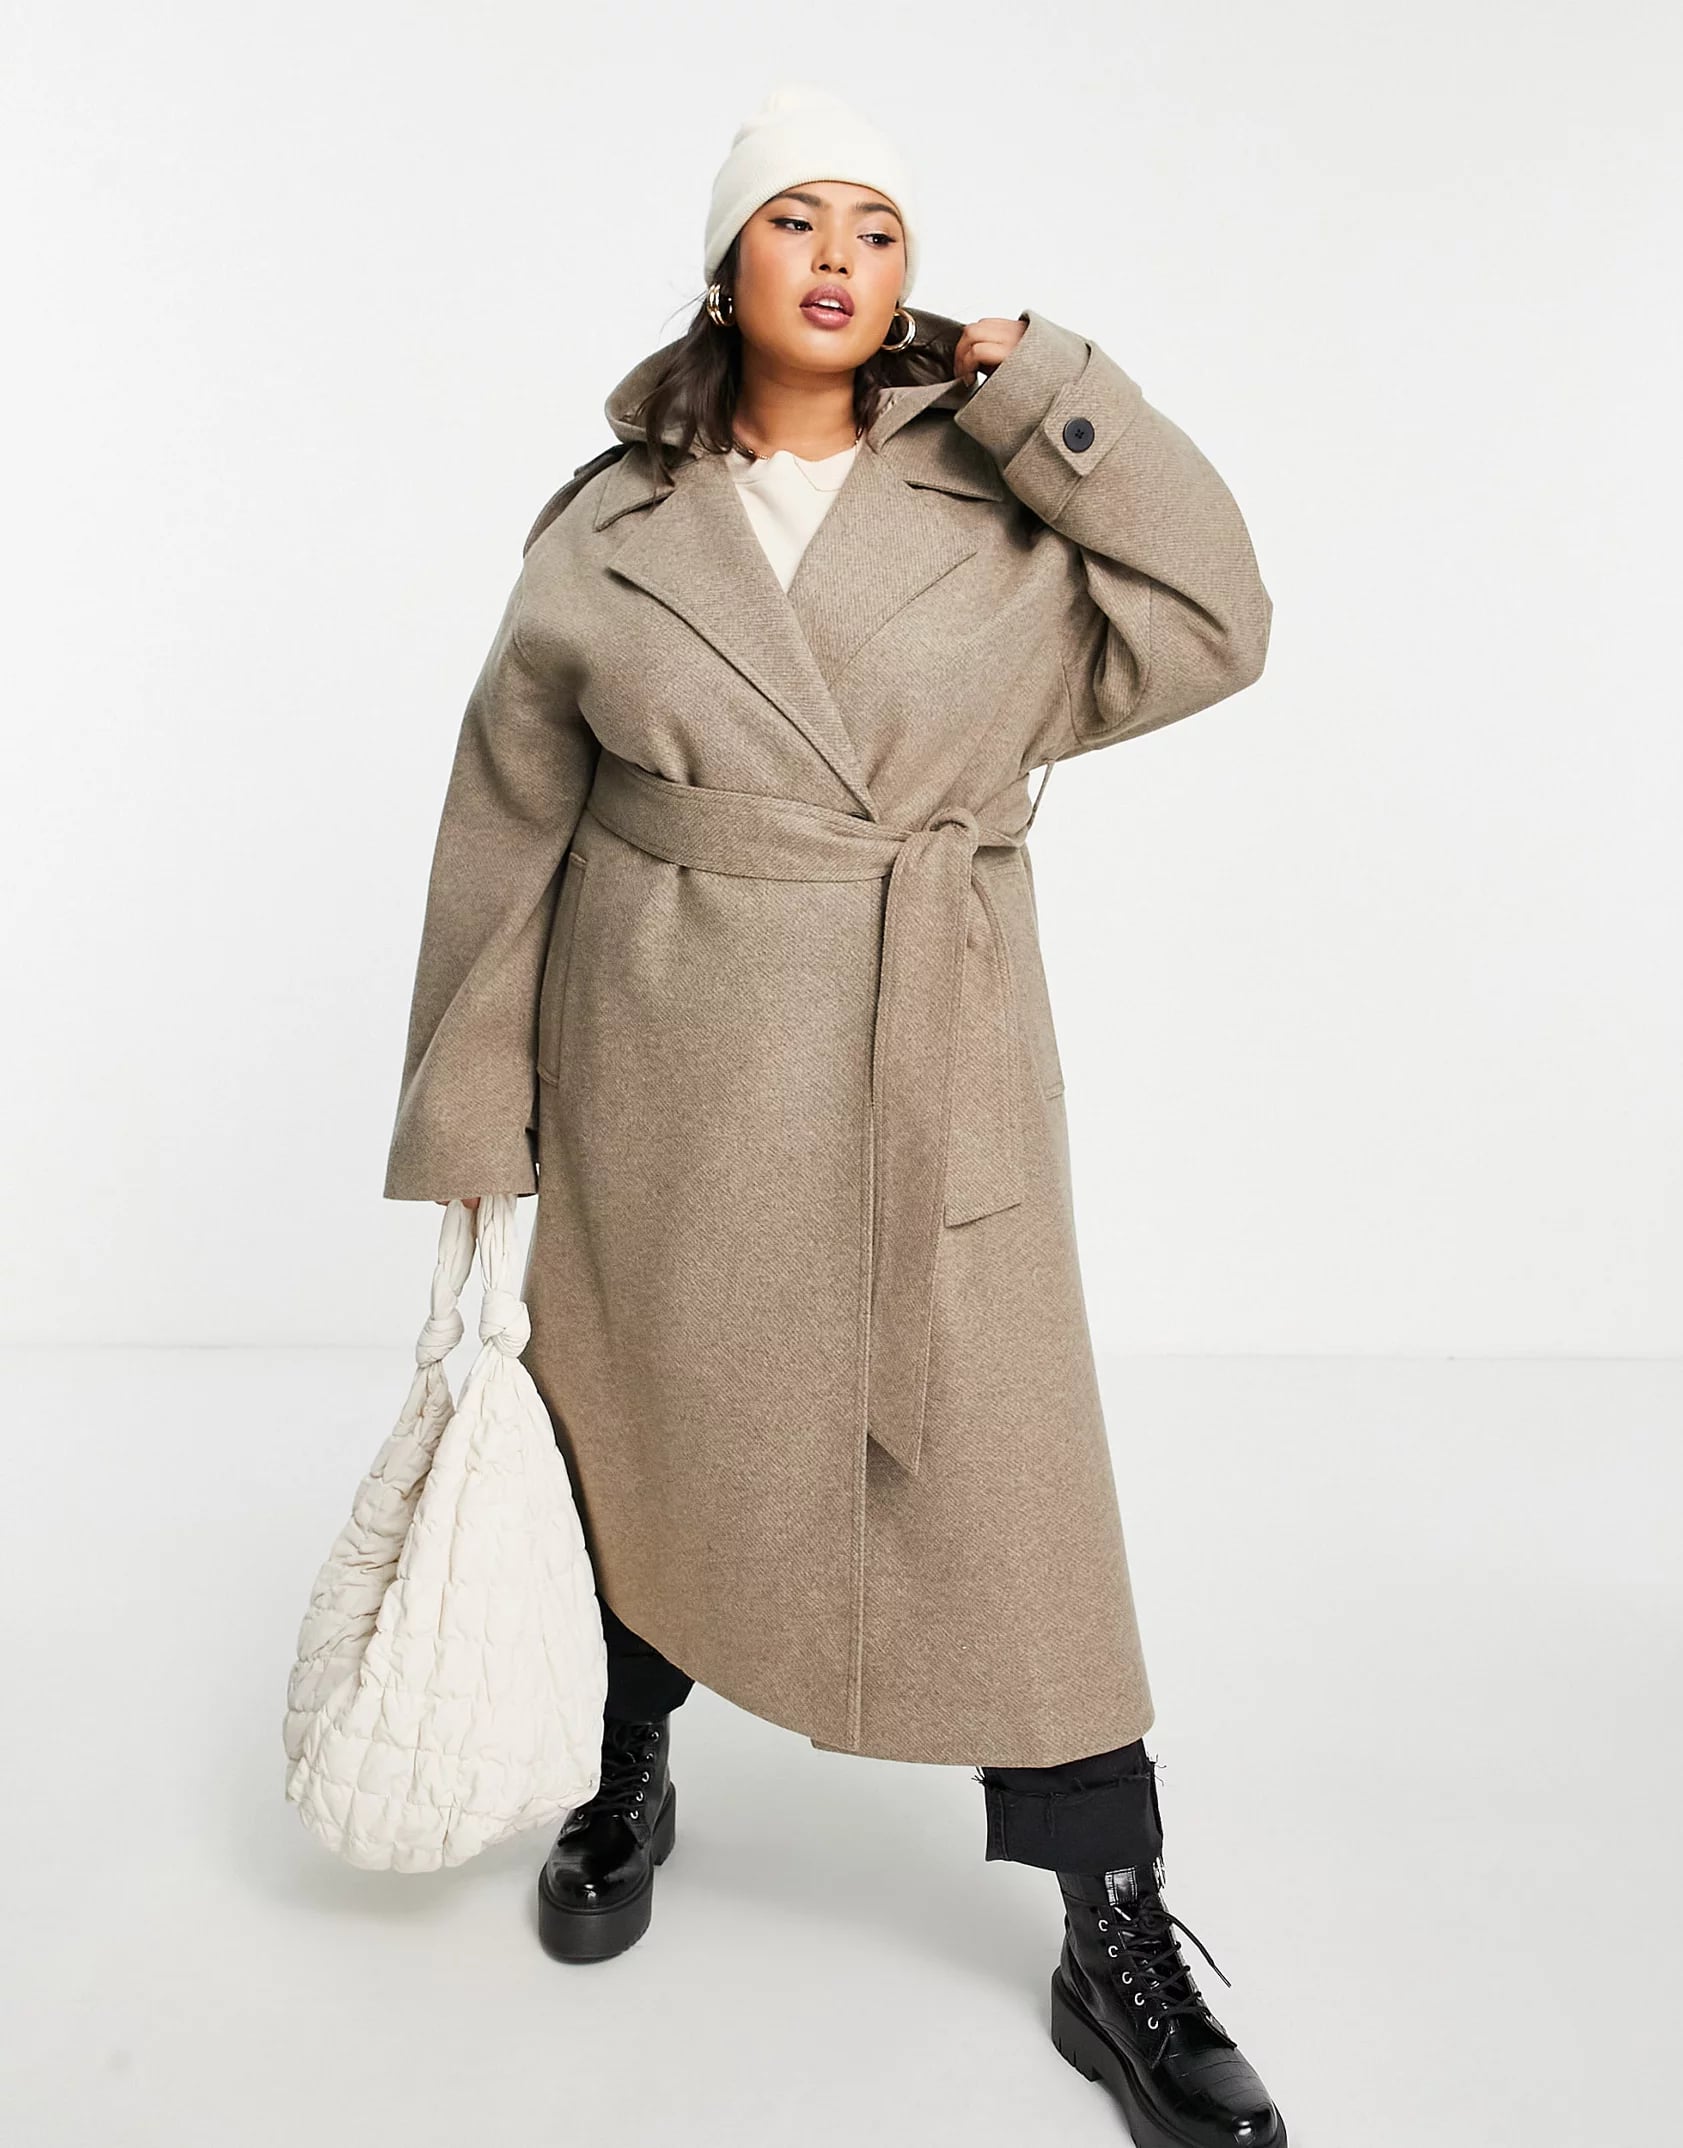 These Outerwear Pieces Are Trending with Curvy Women - 7 Pieces